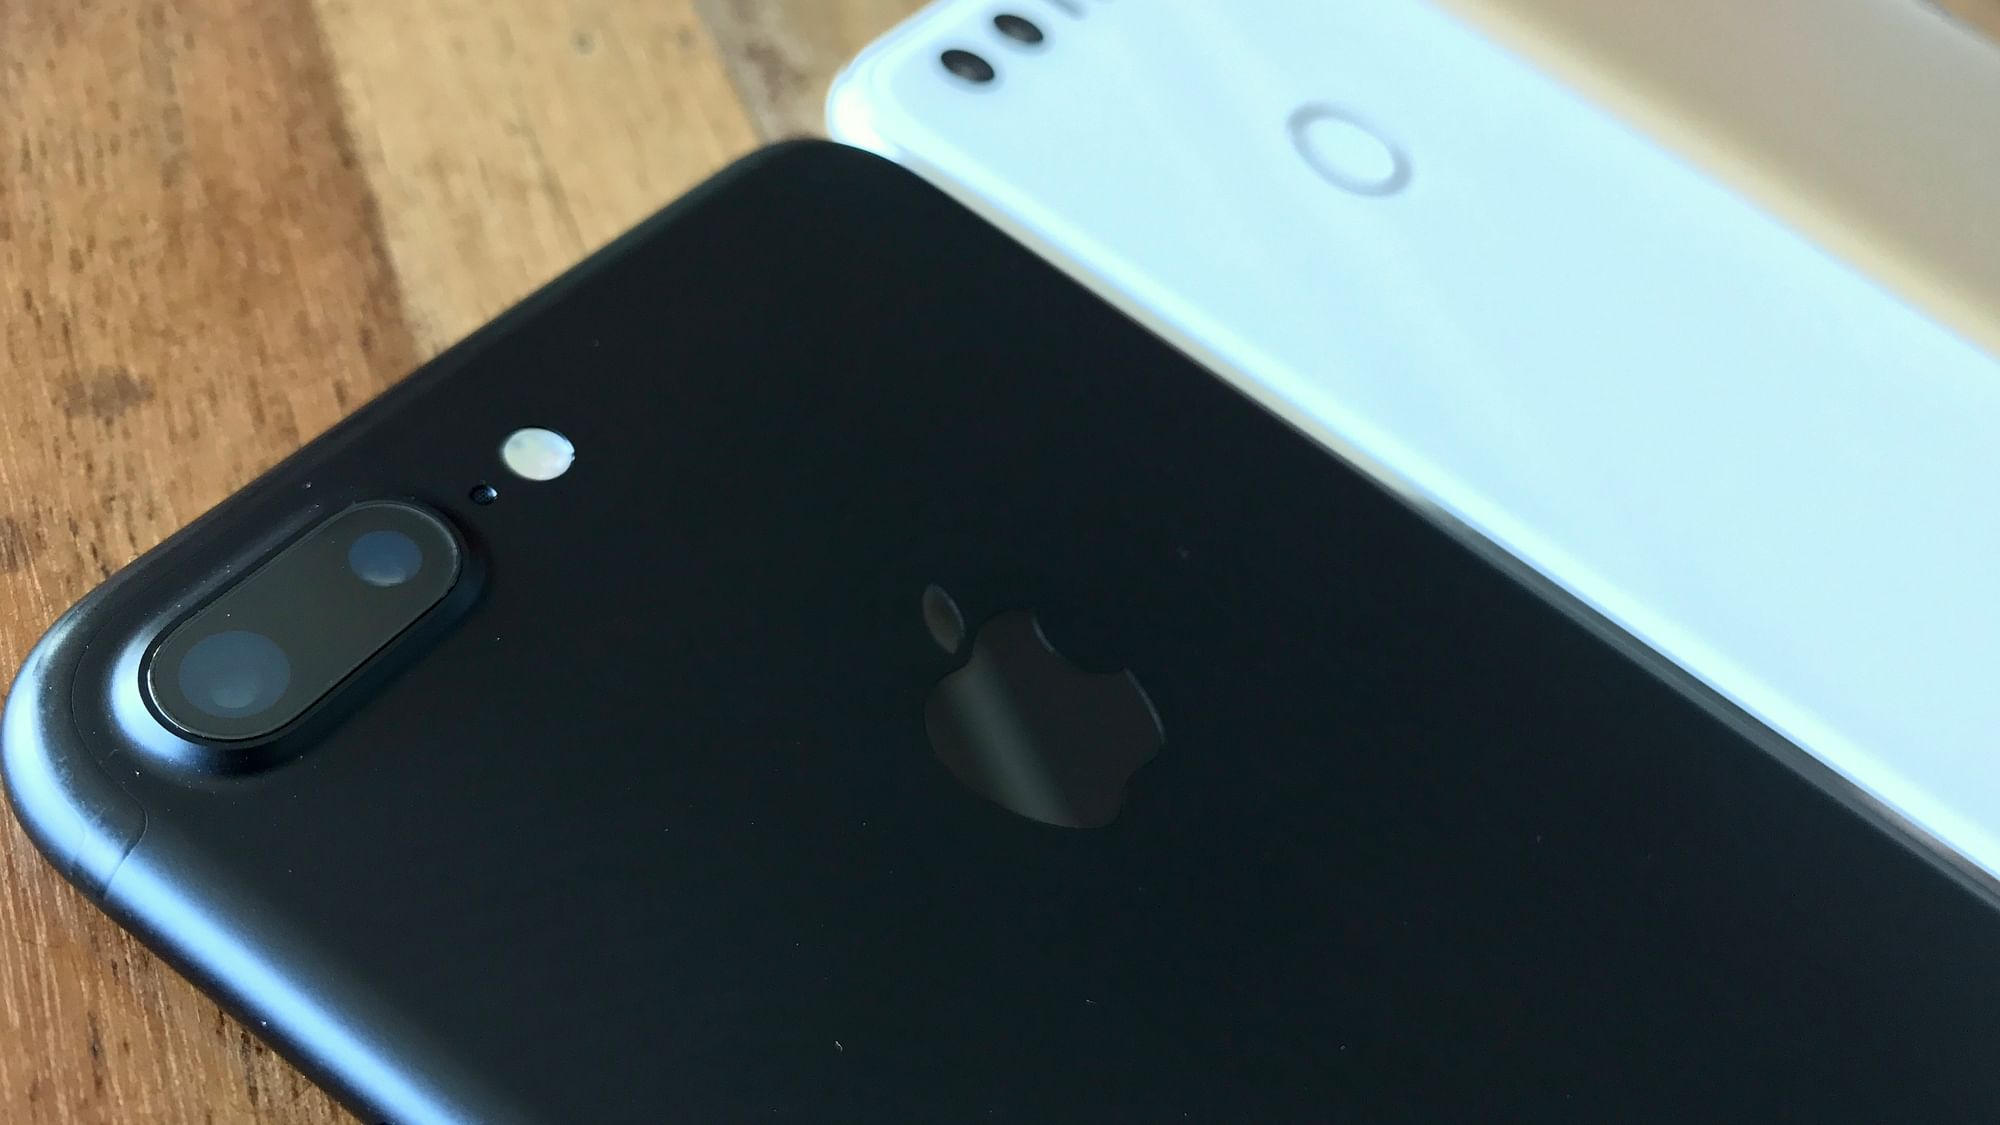 Apple’s iPhone 7 Plus comes with dual camera. (Photo: <b>The Quint</b>)